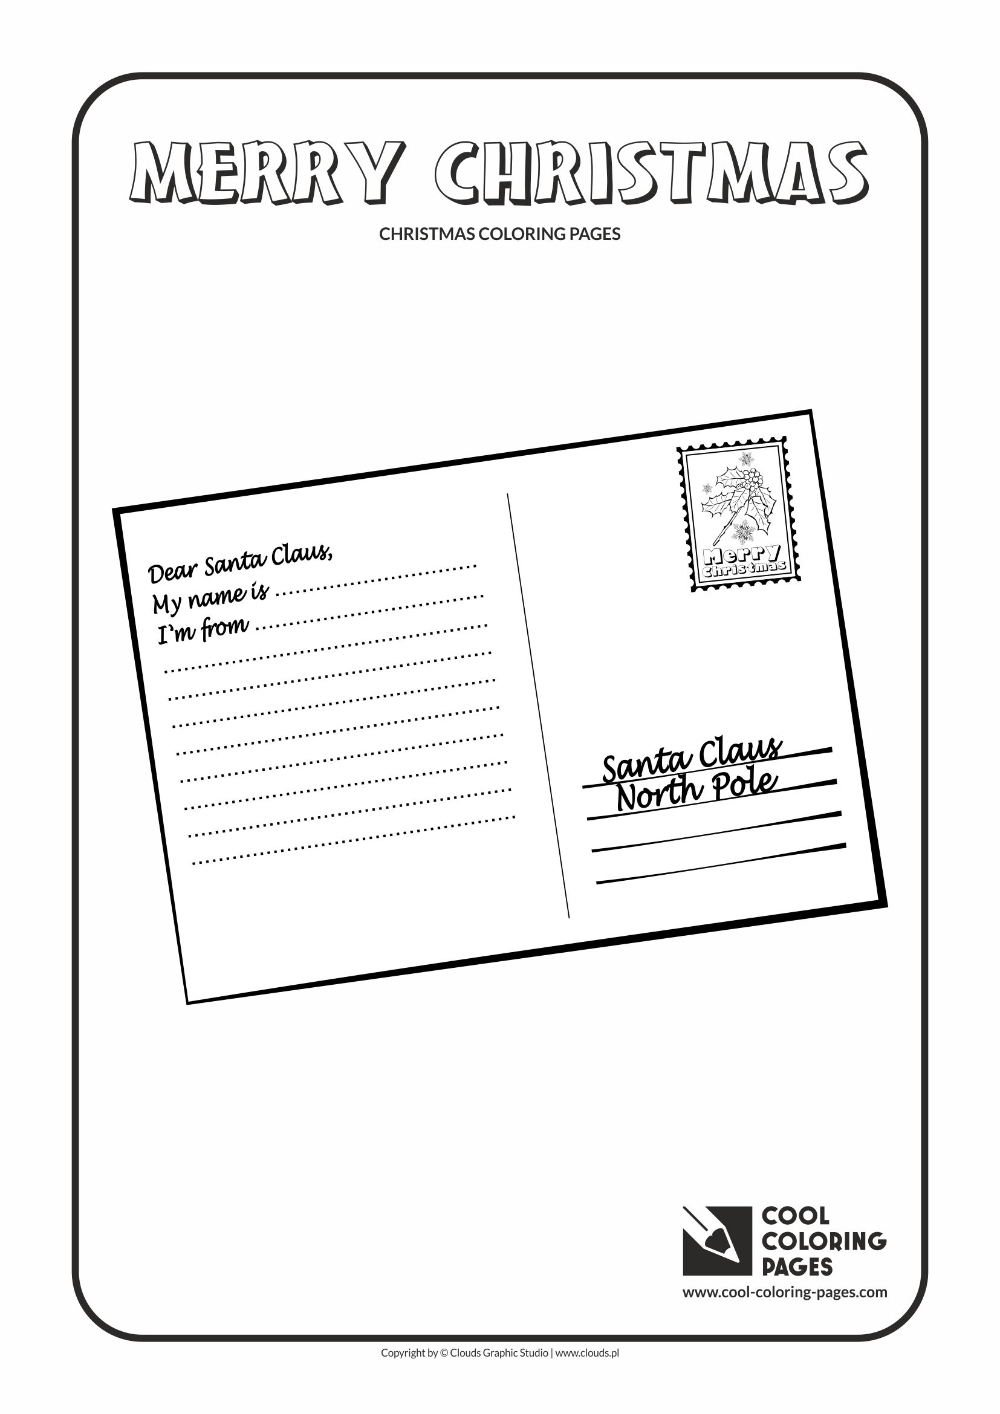 Cool coloring pages postcard to santa claus coloring page